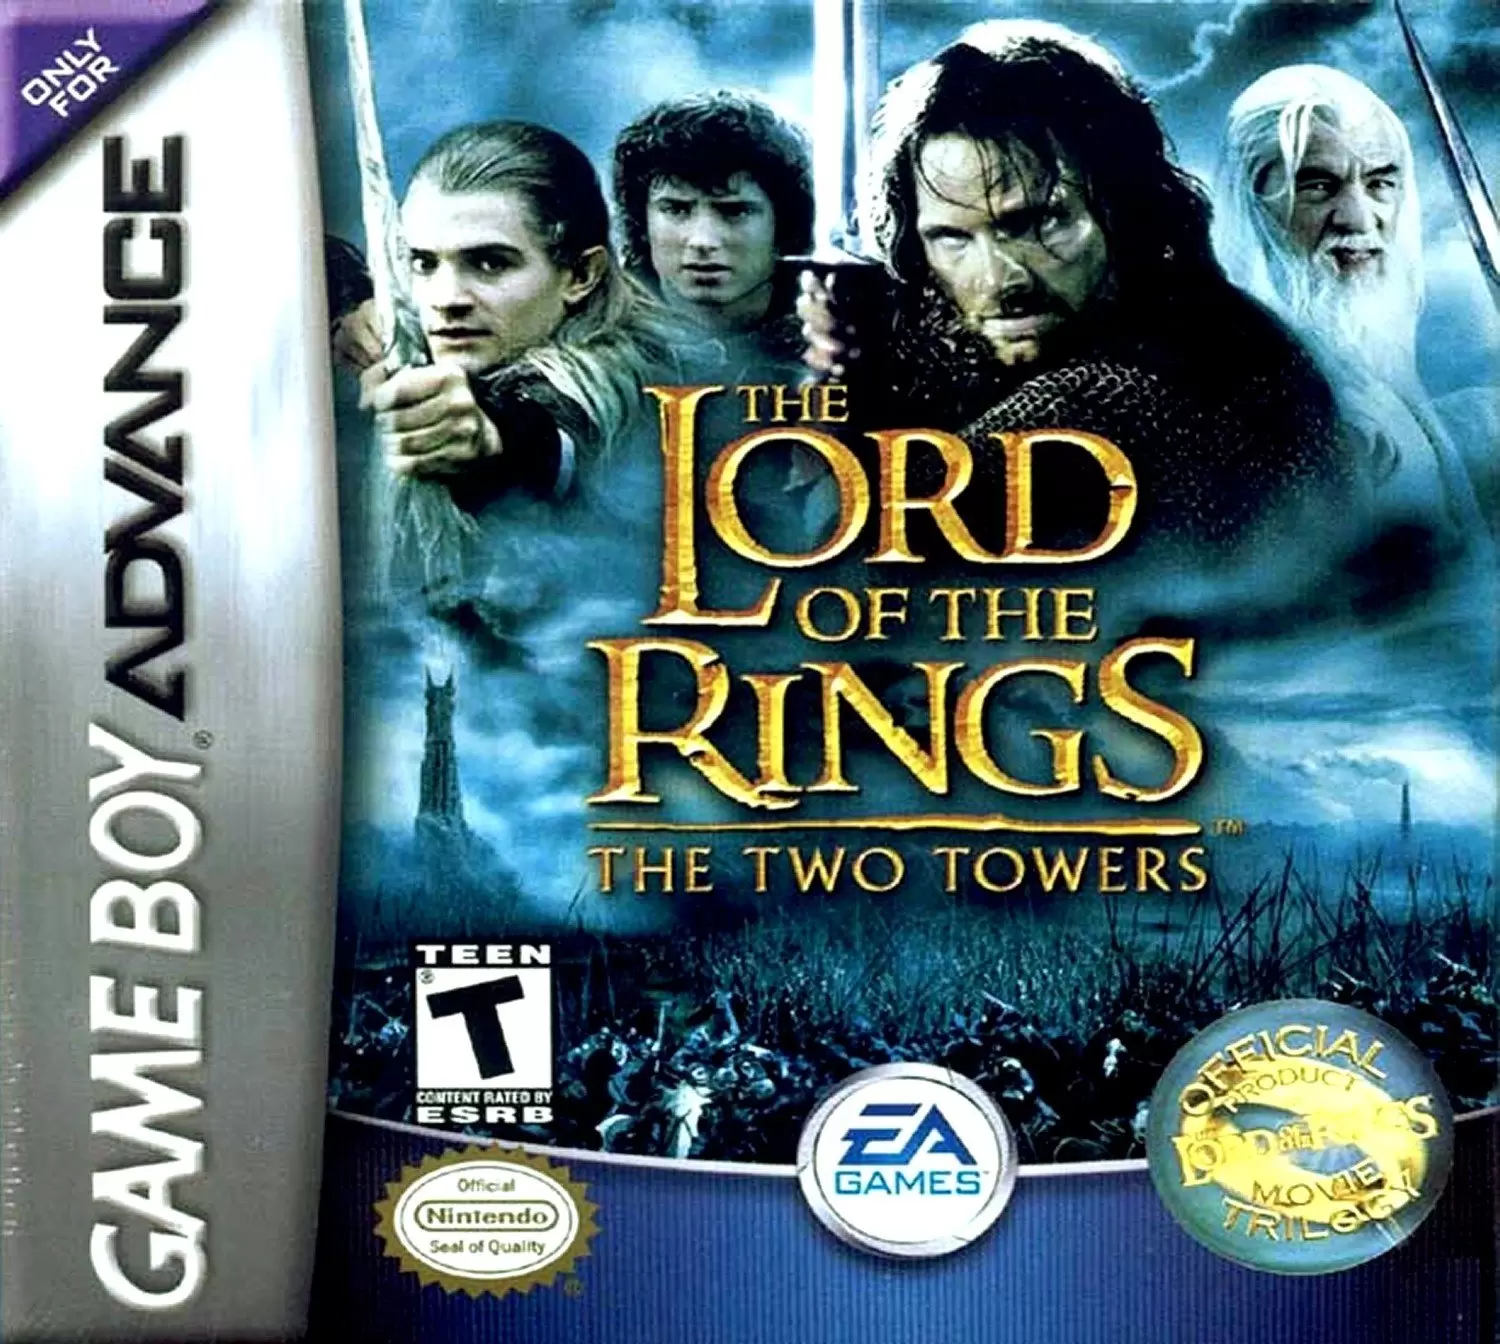 Game Boy Advance Games - The Lord of the Rings: The Two Towers